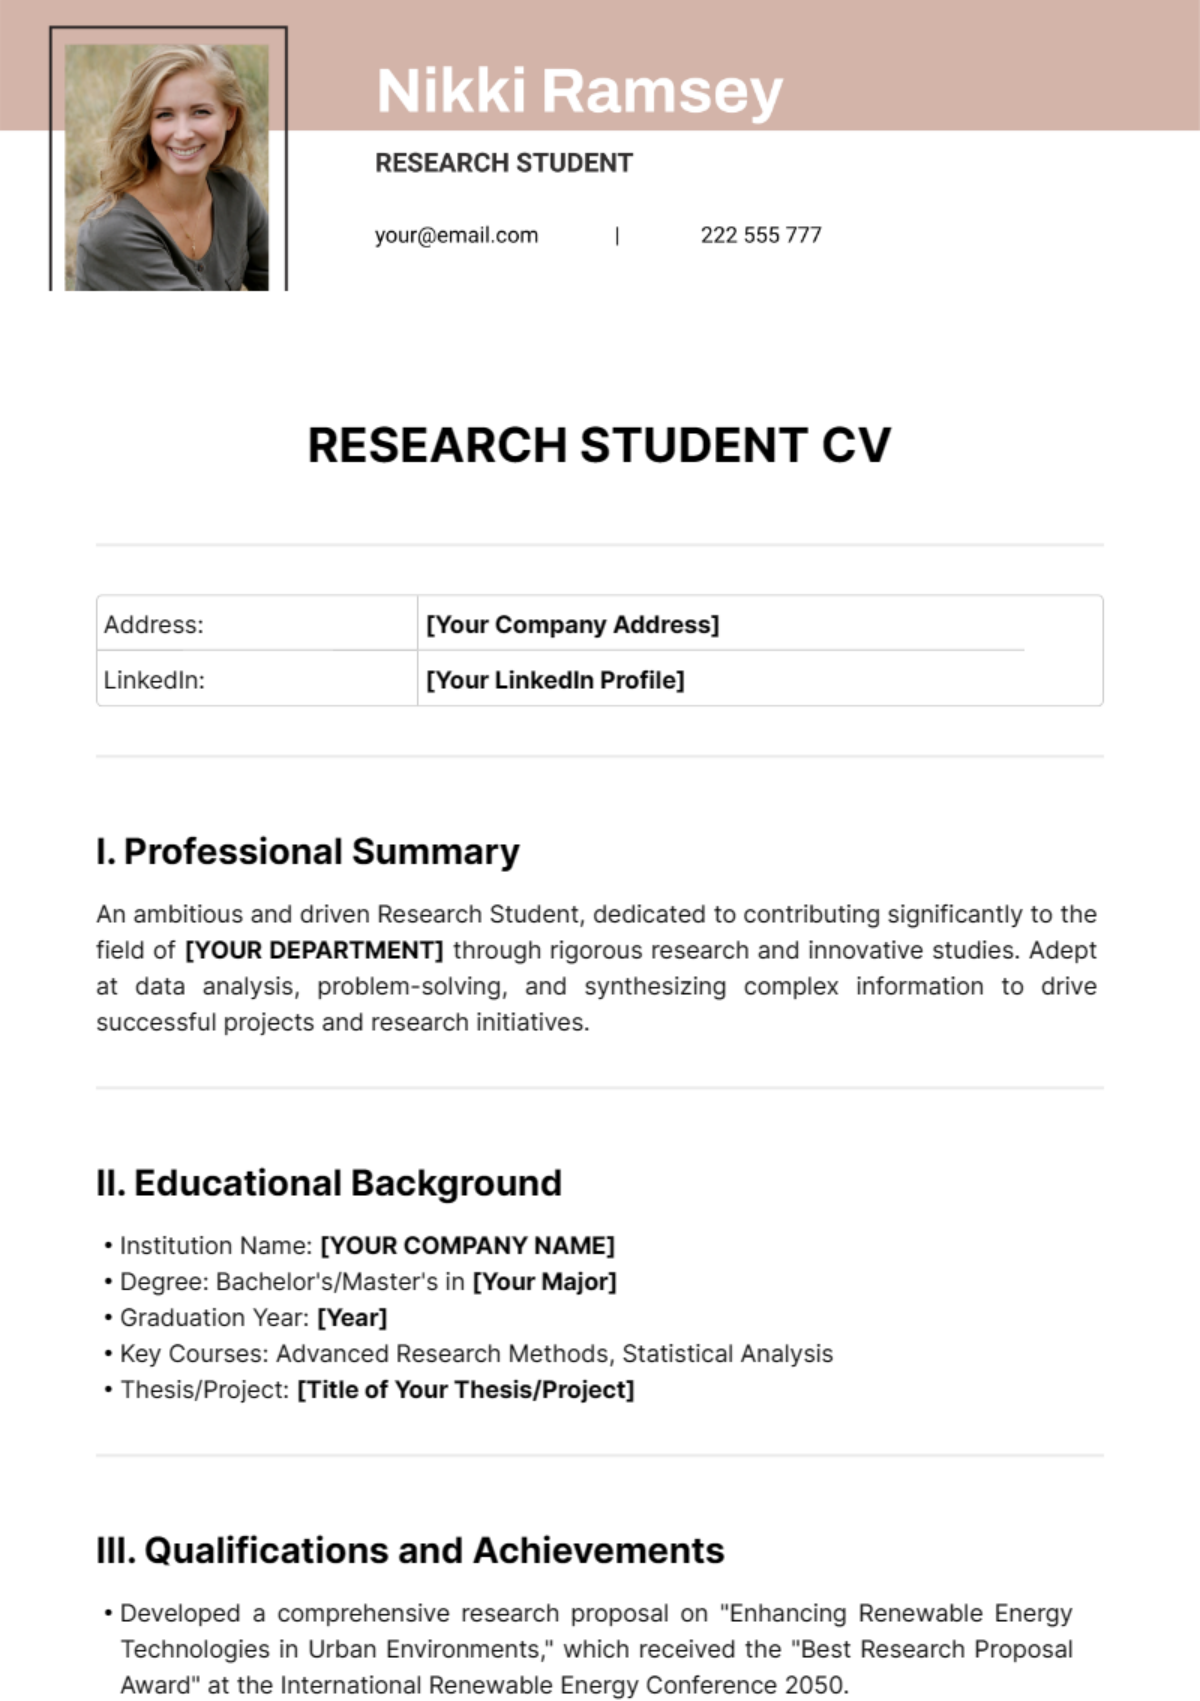 Free Research Student CV Template